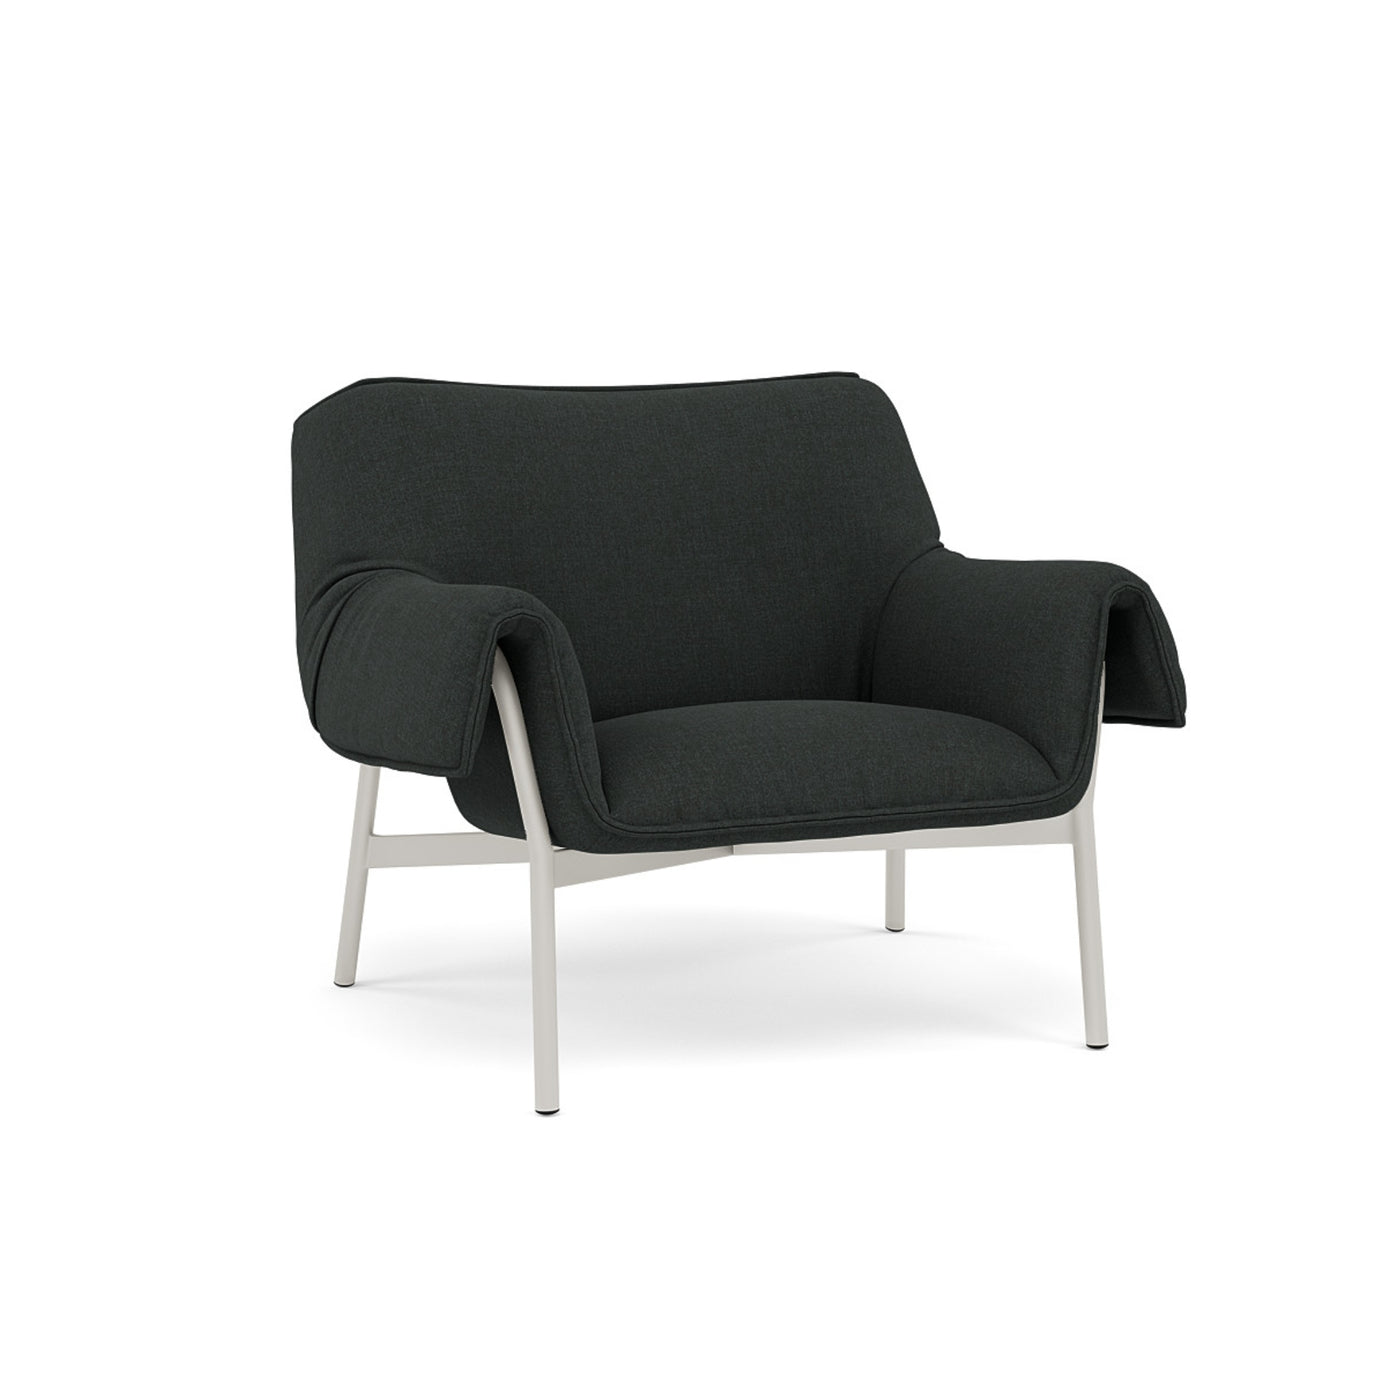 Muuto Wrap Lounge Chair. Made to order from someday designs. #colour_remix-973